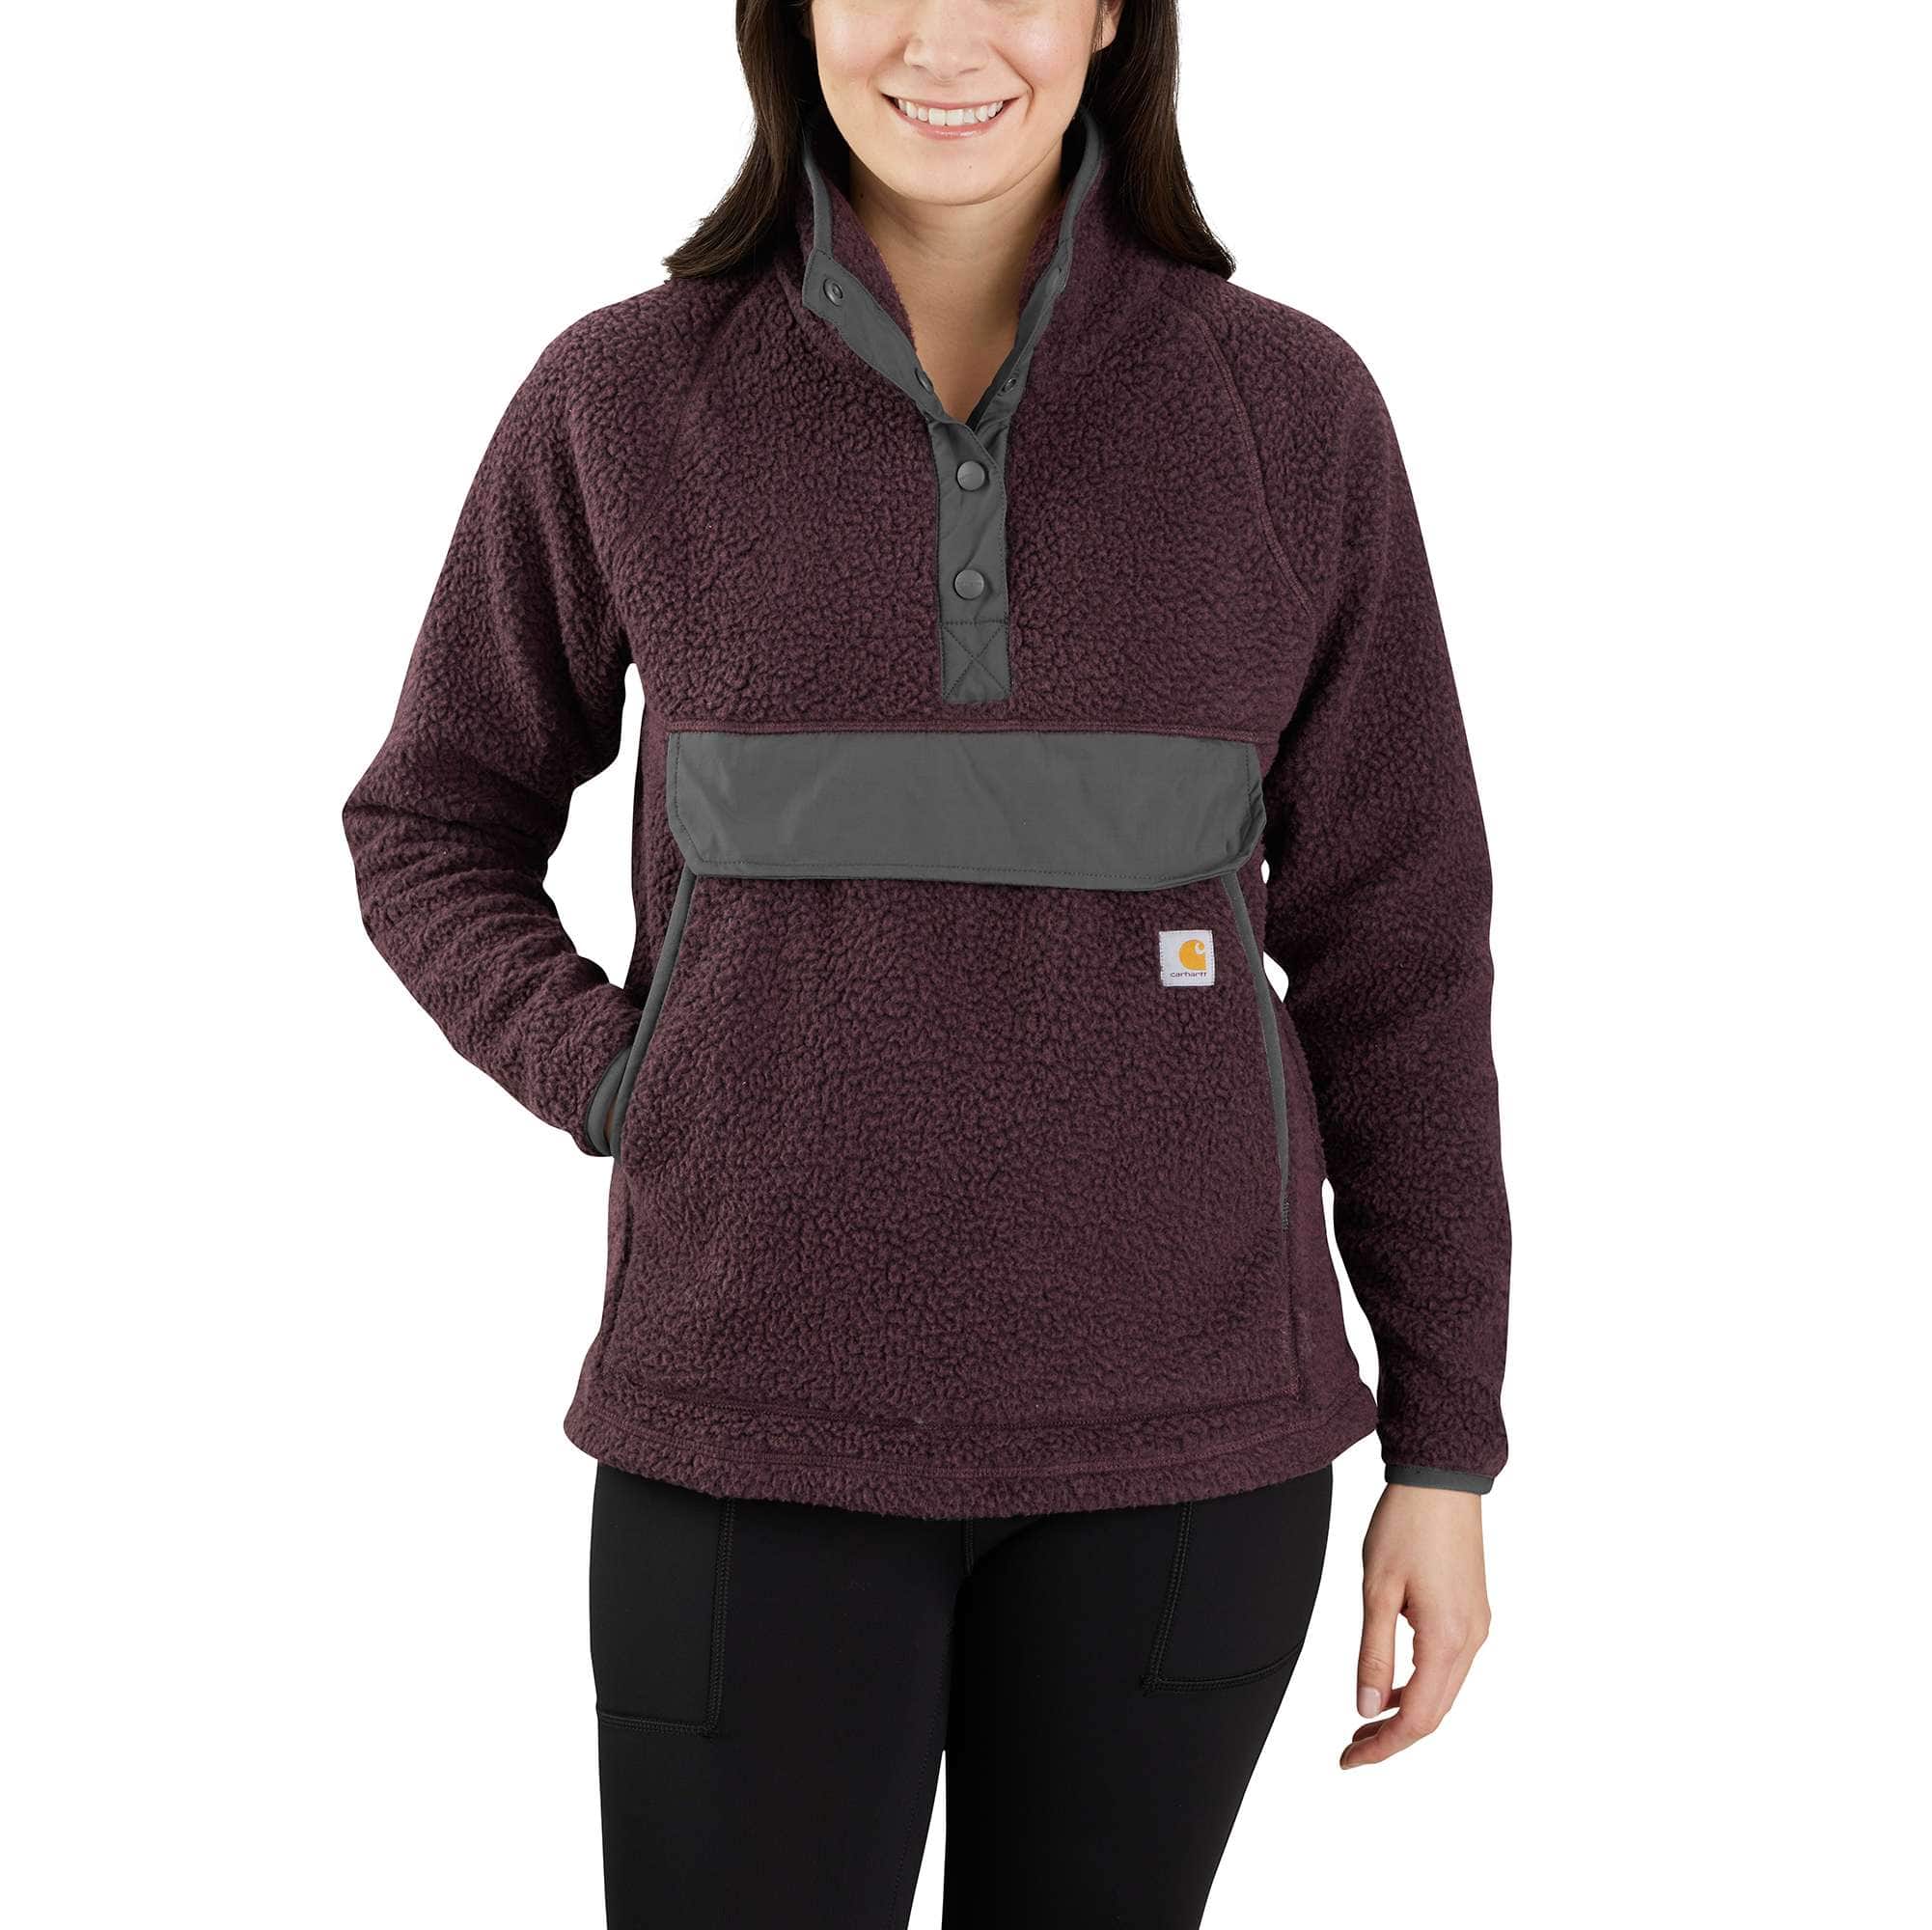 Women's Relaxed Fit Fleece Pullover - 2 Warmer Rating | 25% Off Women's ...